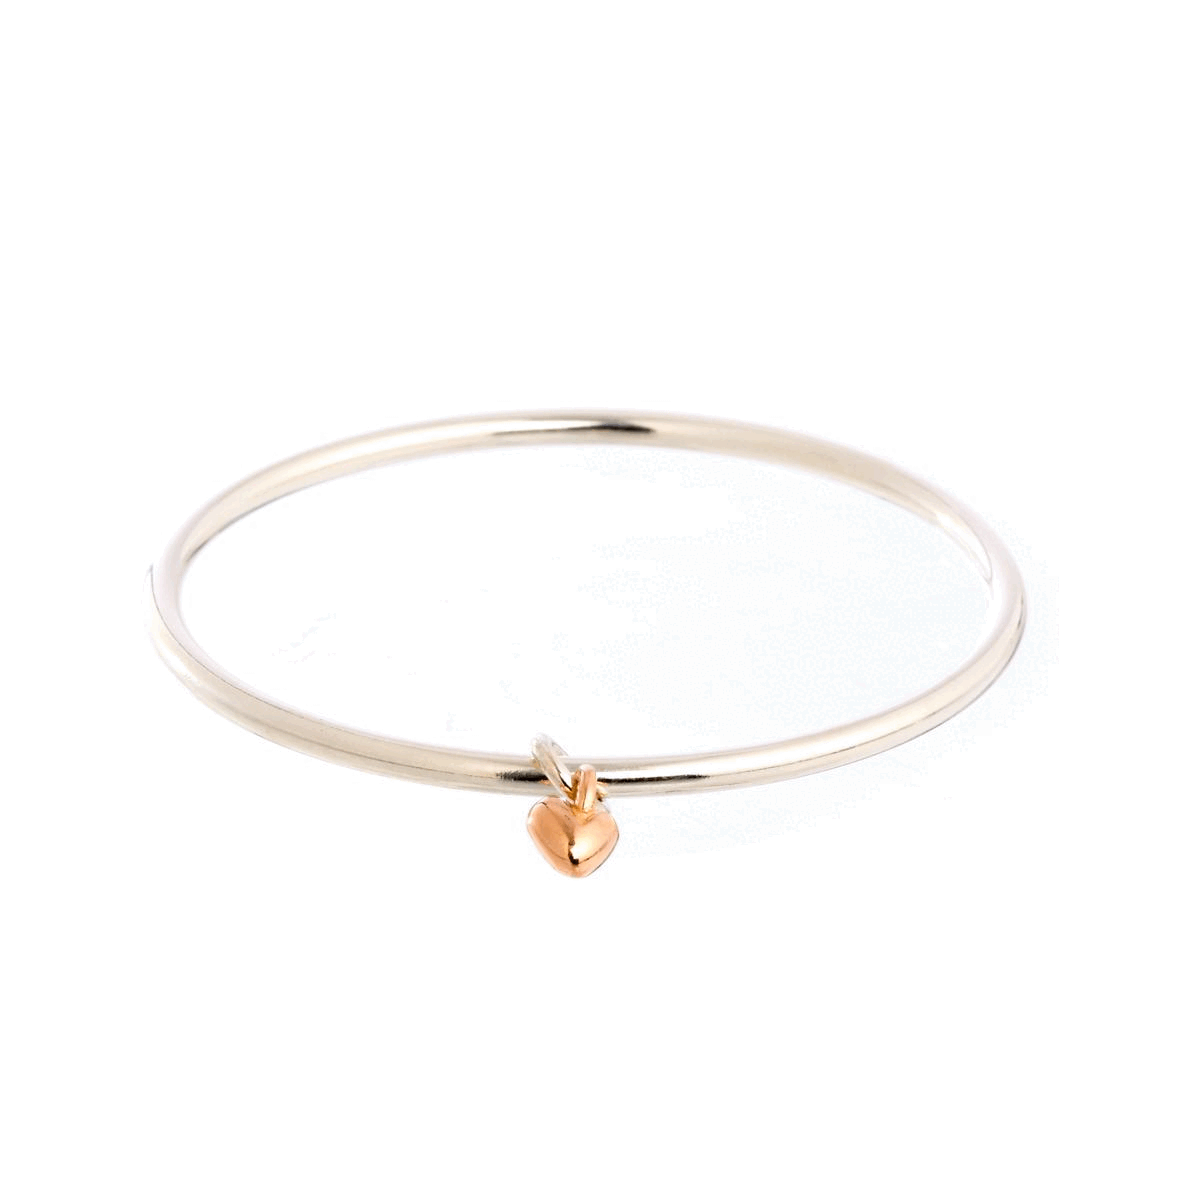 solid silver bangle with recycled rose gold heart charm made in the UK Scarlett Jewellery